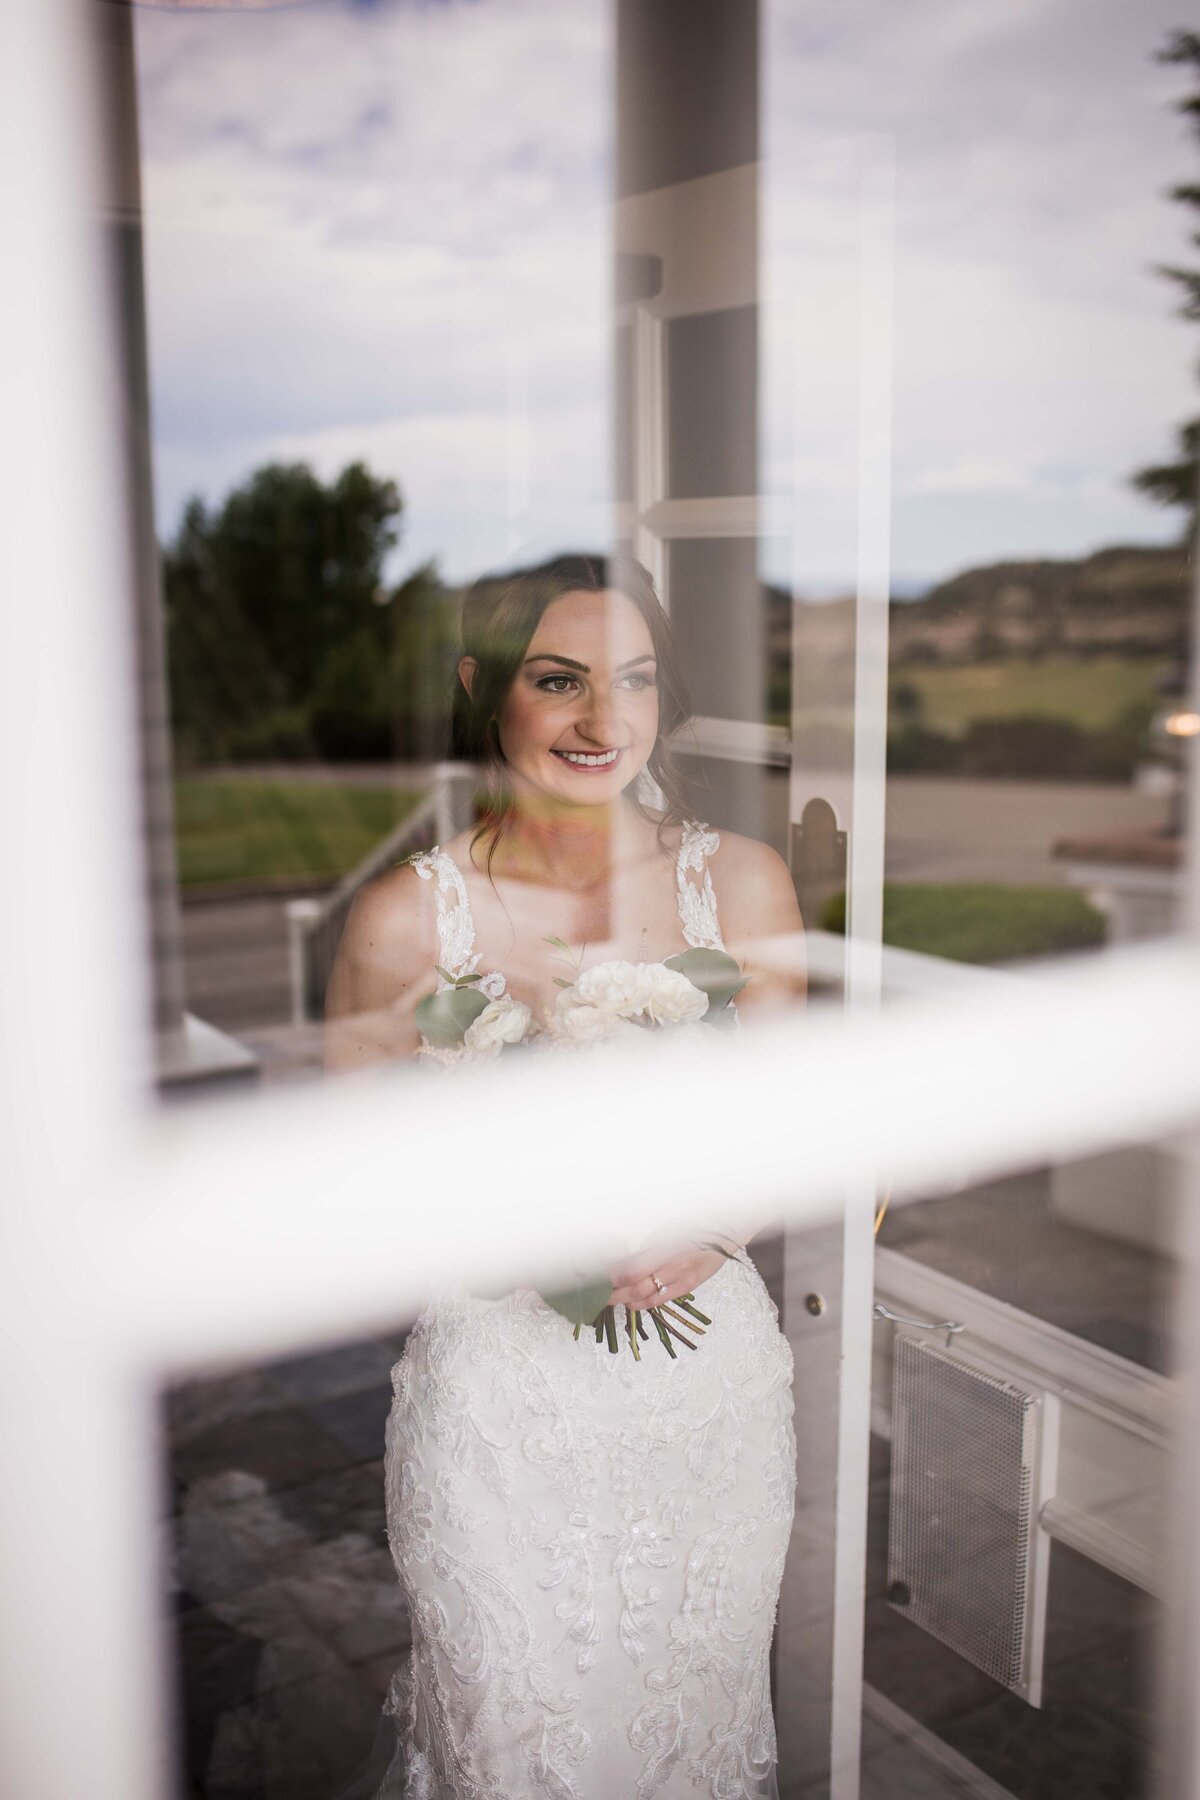 A shot of a bride through a glass window as she waits to see her groom for the first time.